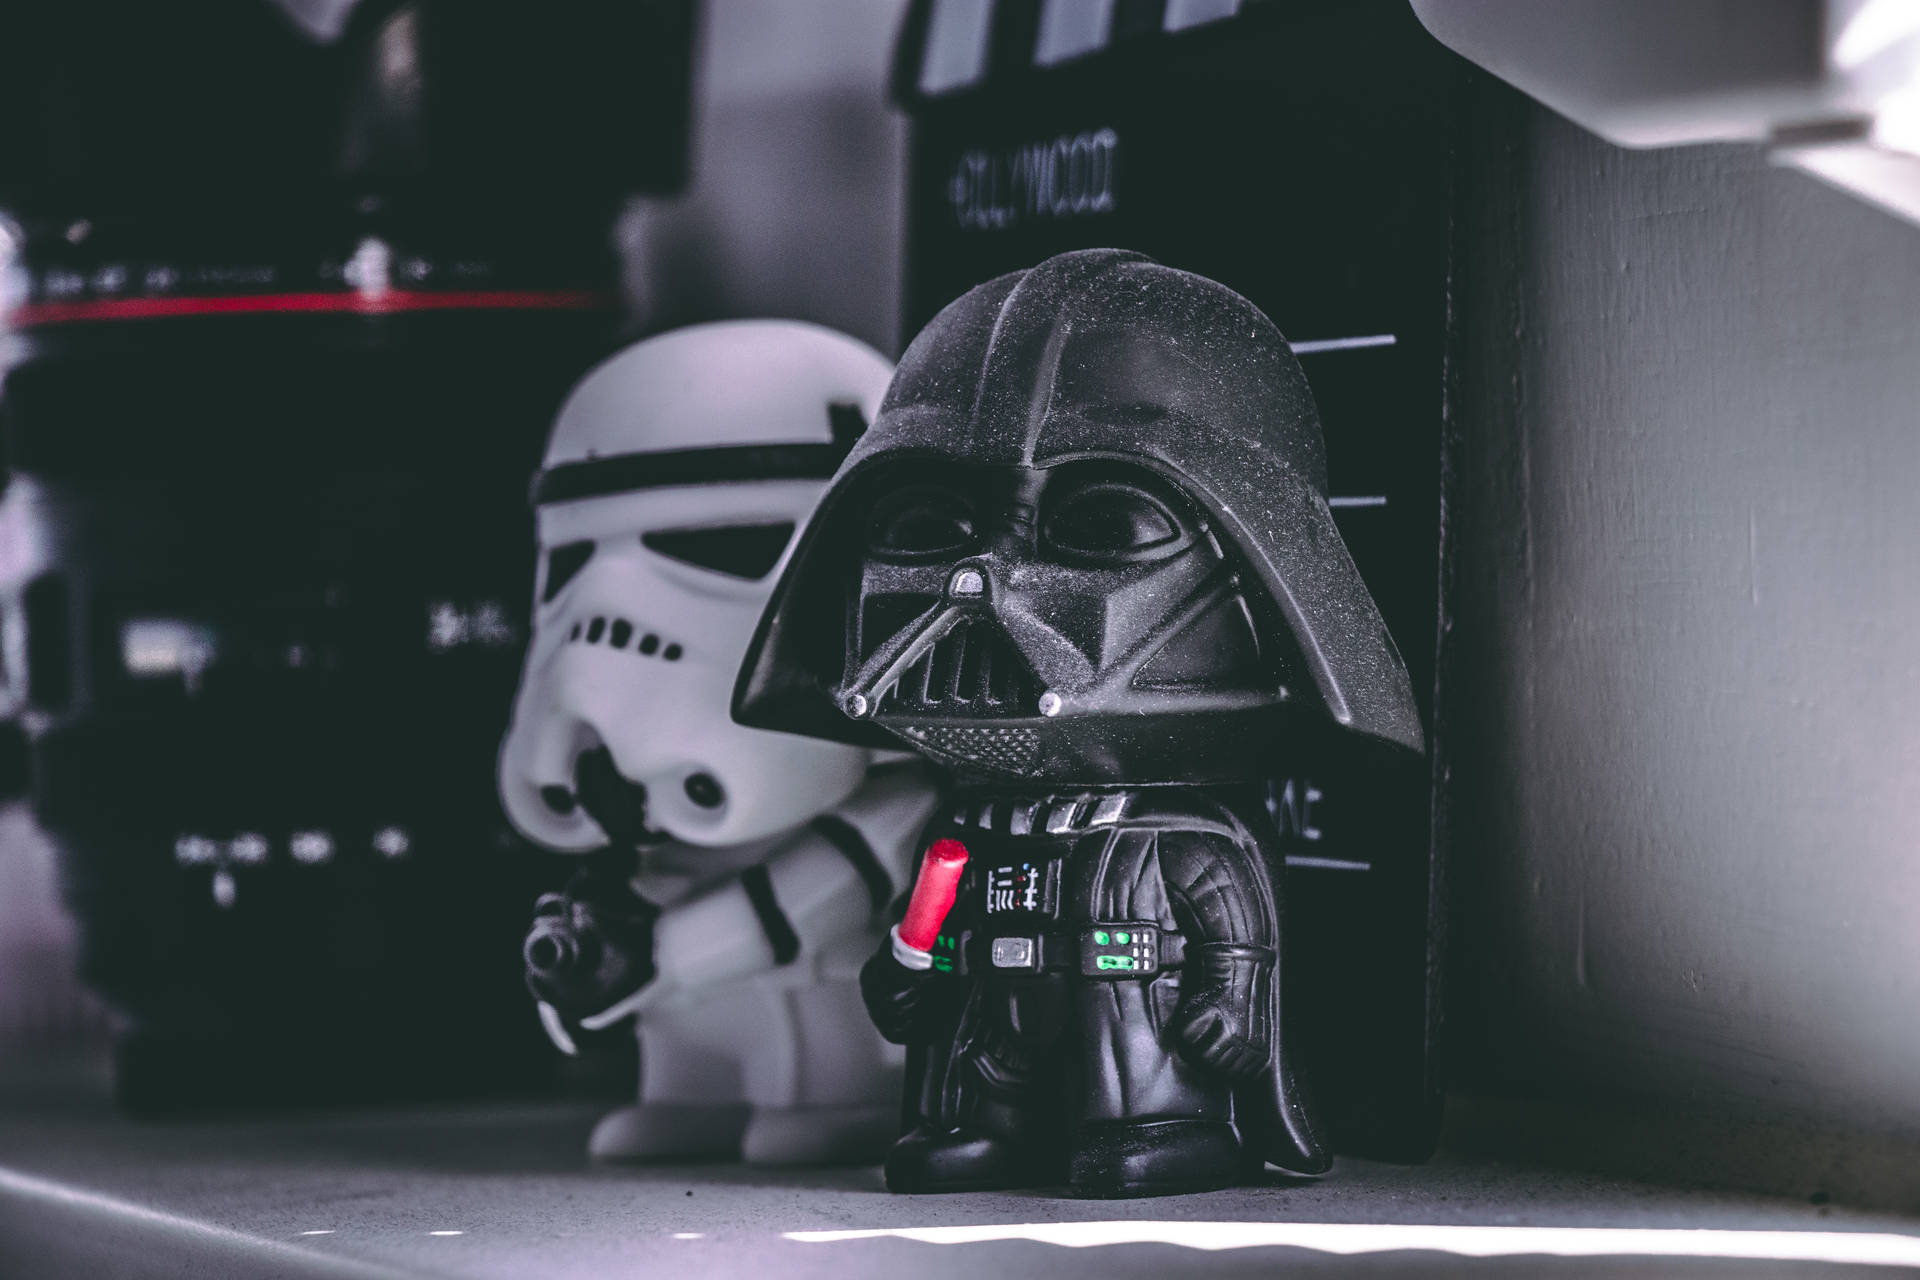 Star Wars Darth Vader And Imperial Stormtrooper Toy Background